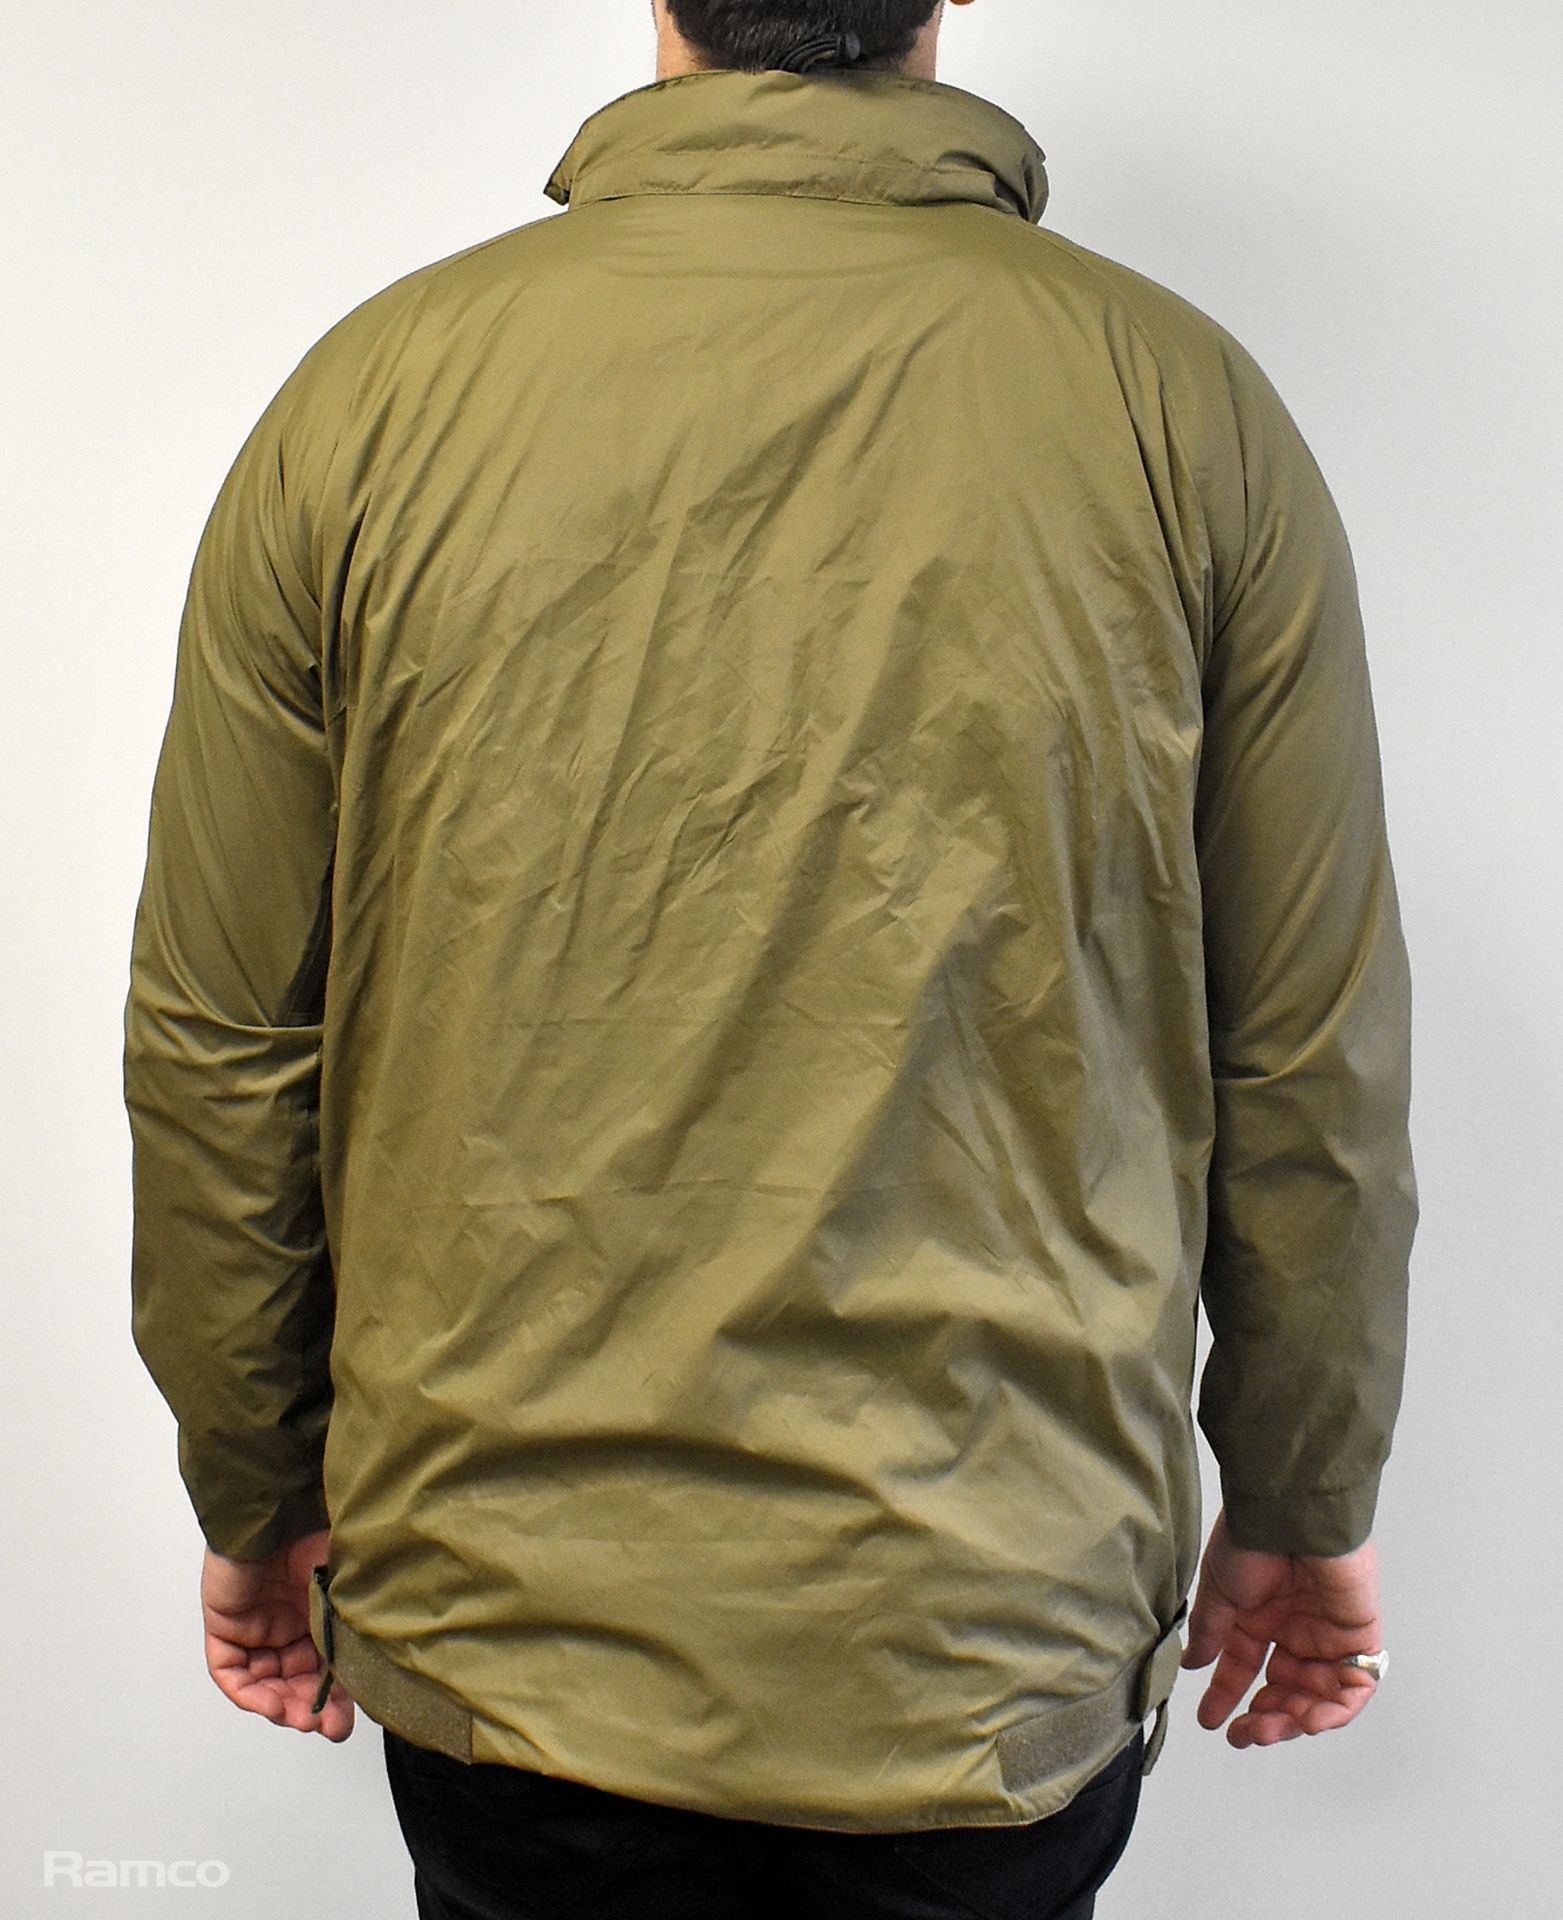 65x British Army MTP lightweight thermal smocks - mixed grades and sizes - Image 3 of 6